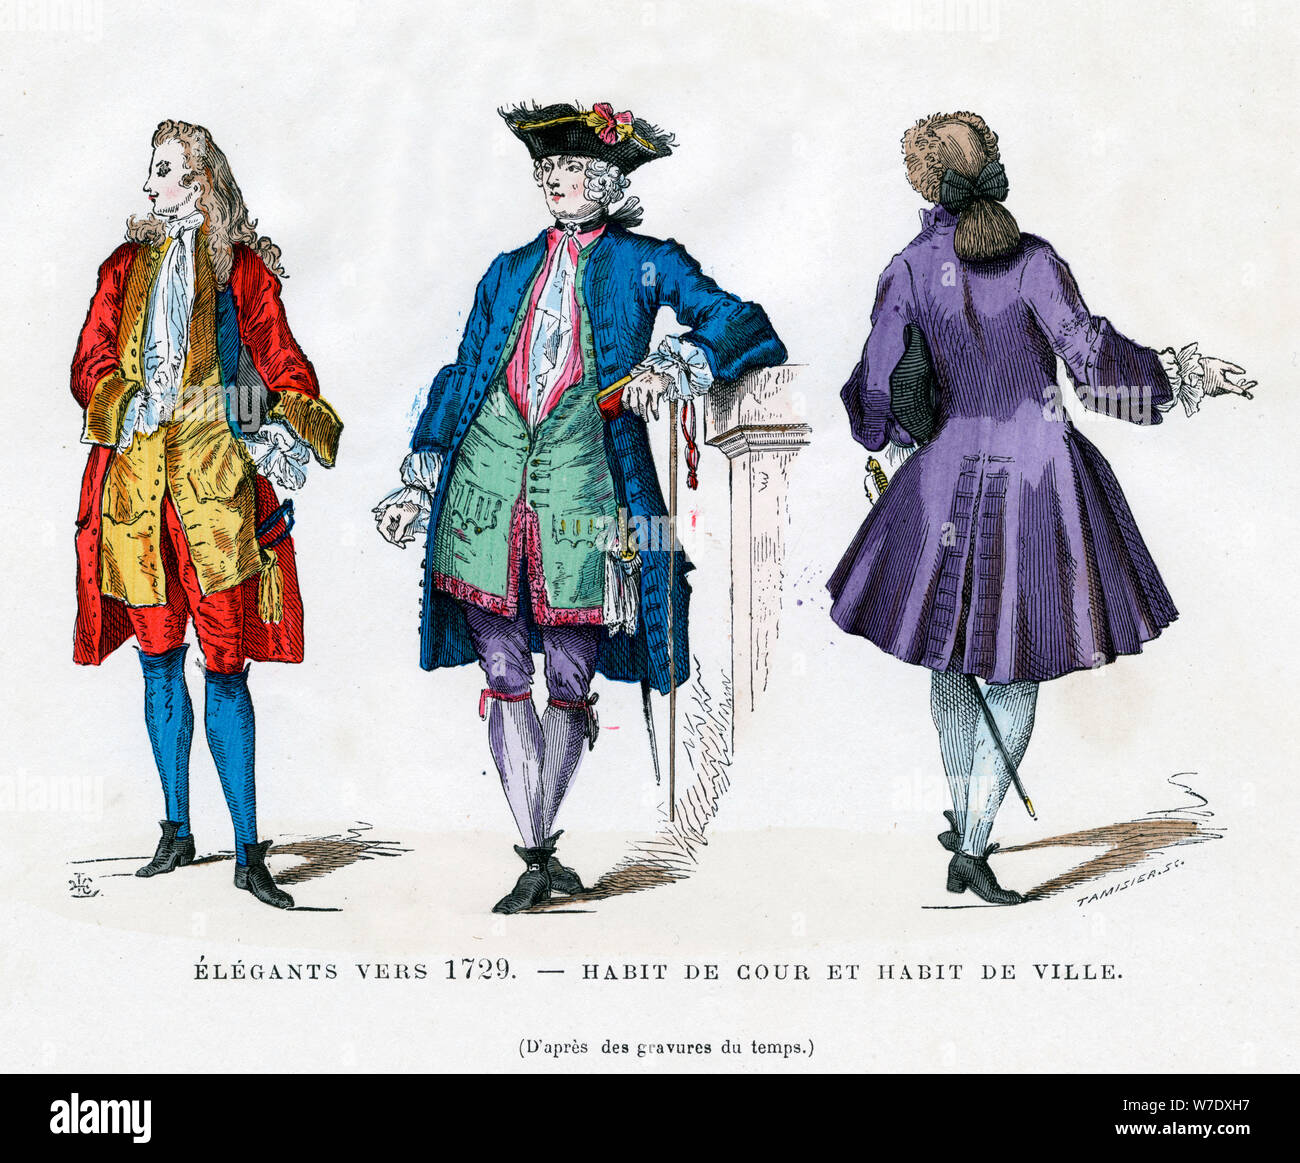 Dandy of c1729, court dress and town dress, (1882-1884).Artist: Tamisier Stock Photo